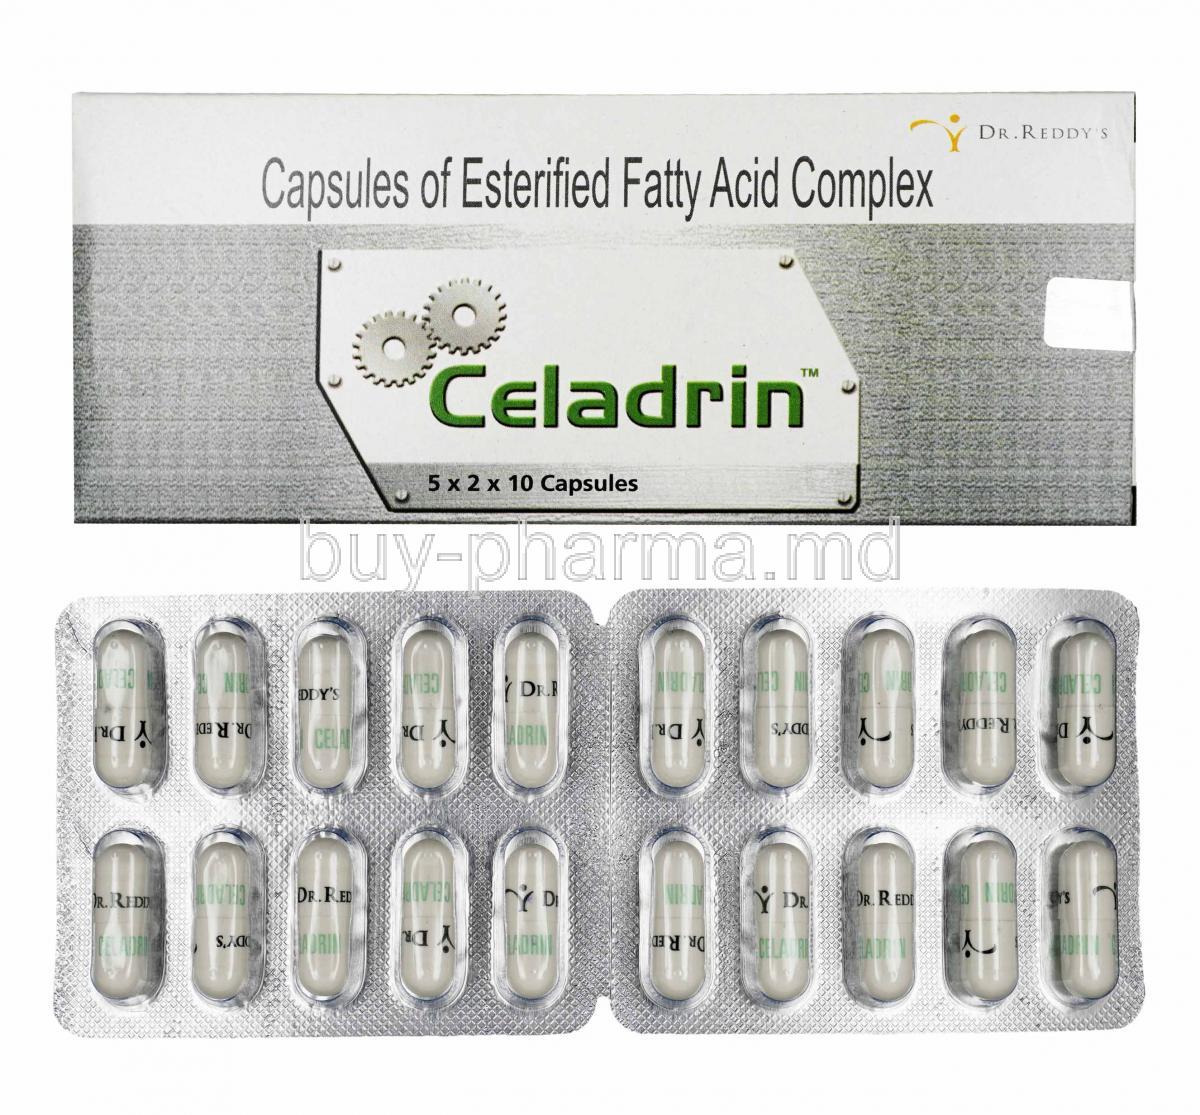 Celadrin box and capsules